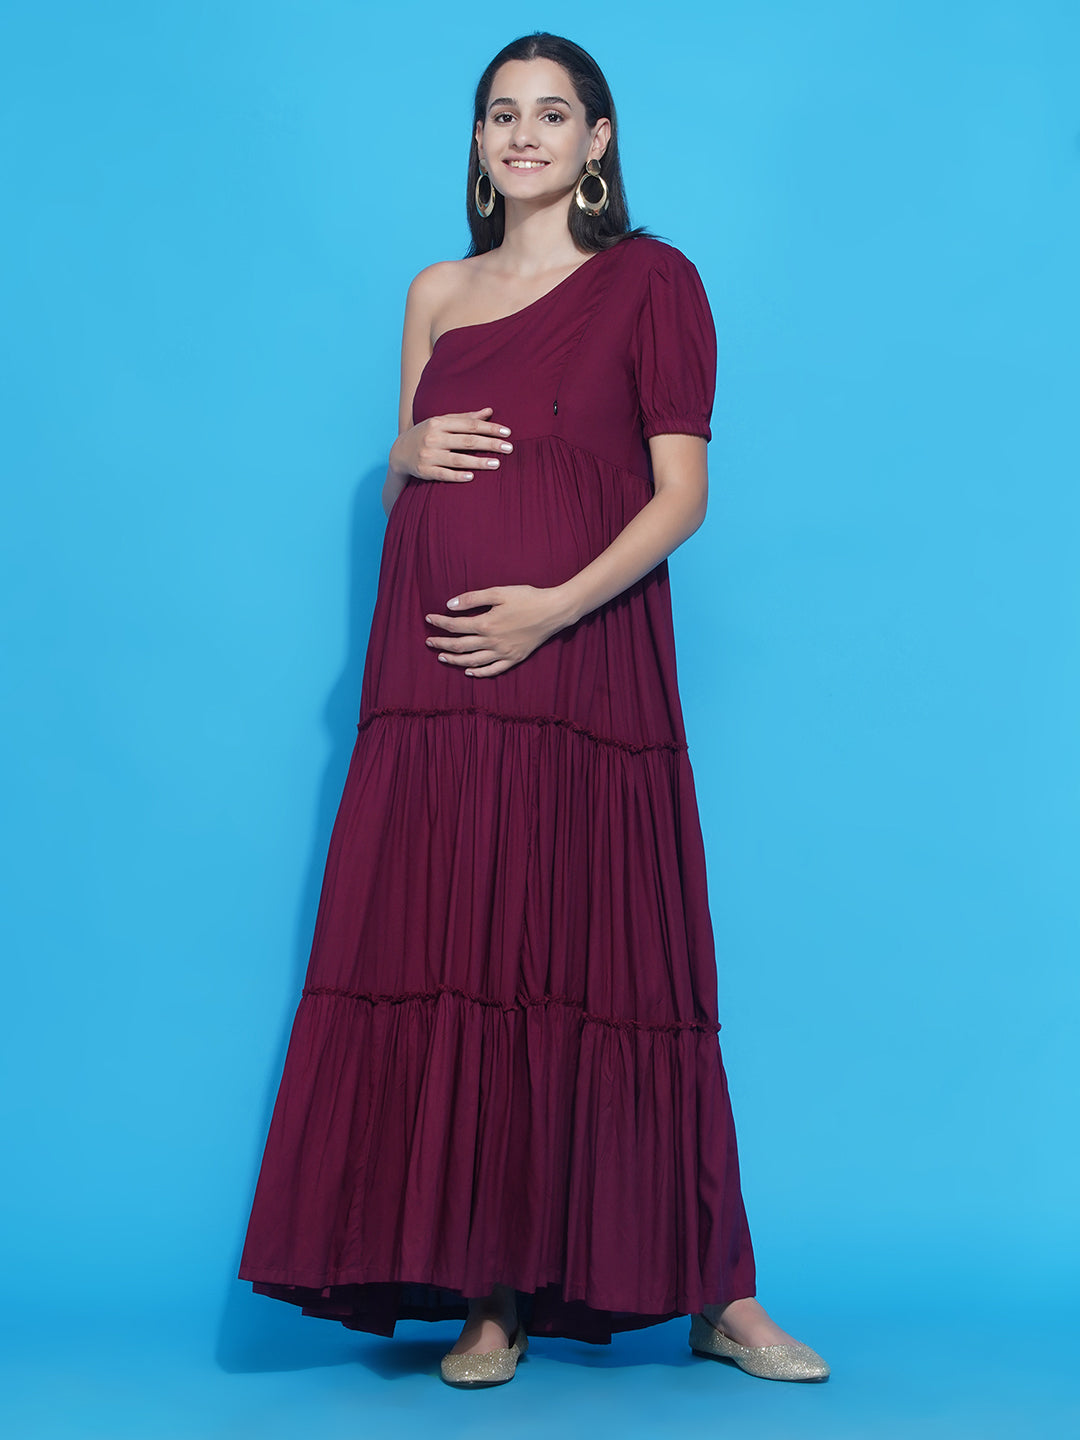 Illusion Maternity Dresses See Through Women Off Shoulder Half Sleeves  Ruched Tulle Feather Prom Dress For Photo Shoot Baby Shower From Click_me,  $80.41 | DHgate.Com